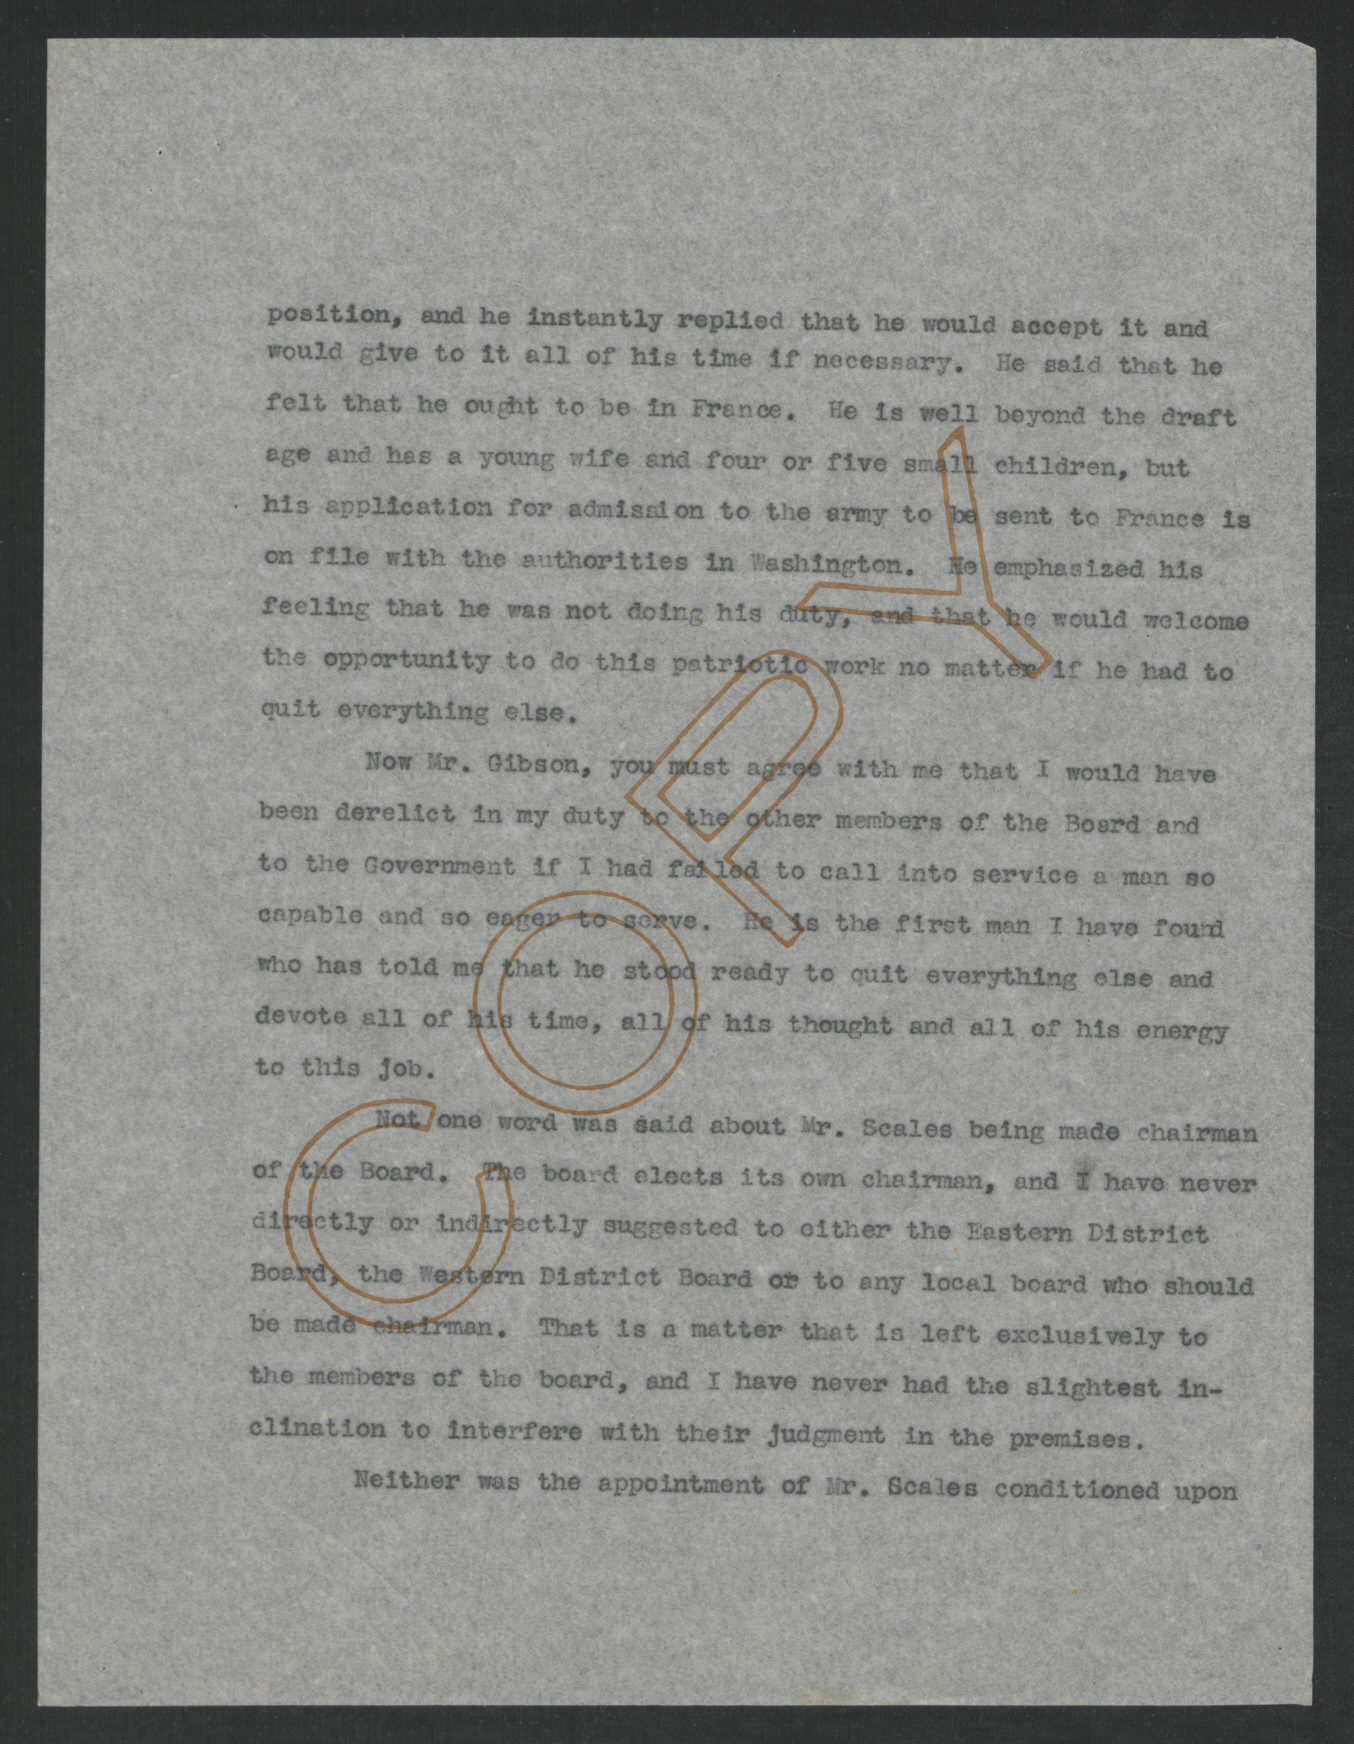 Letter from Thomas W. Bickett to William B. Gibson, January 5, 1918, page 2